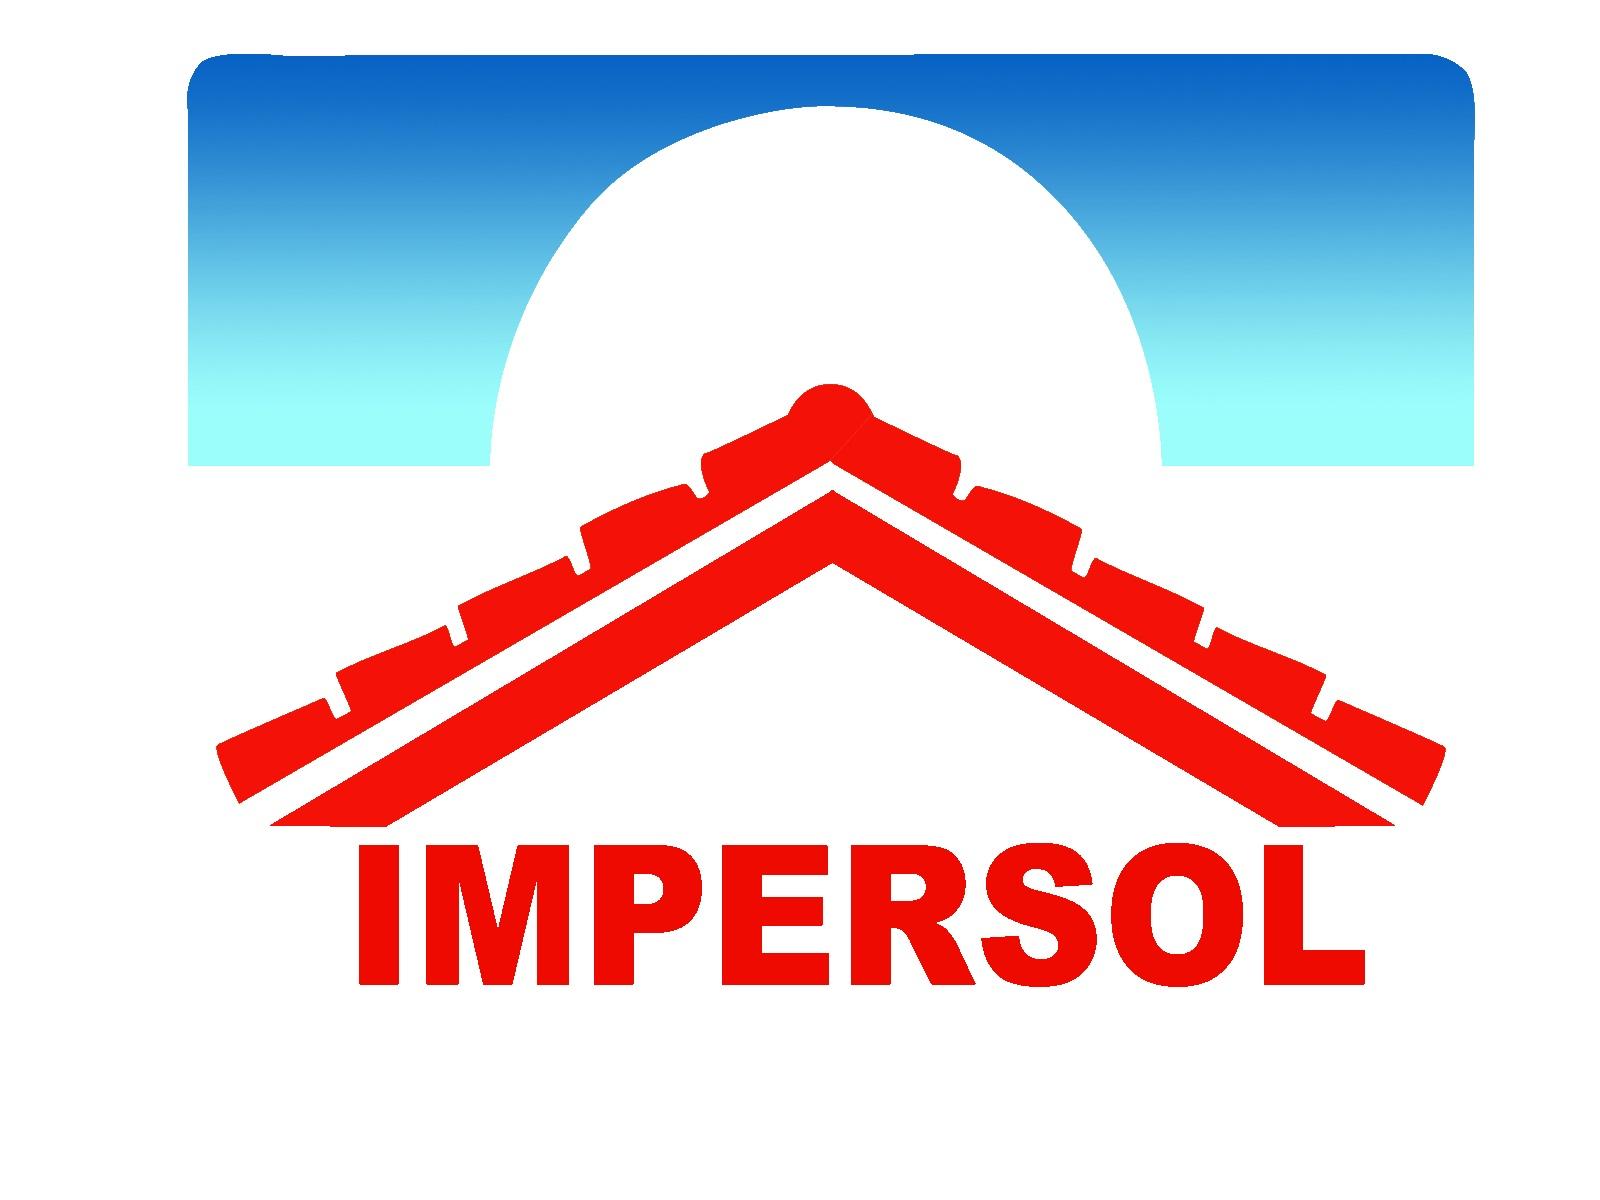 Impersol